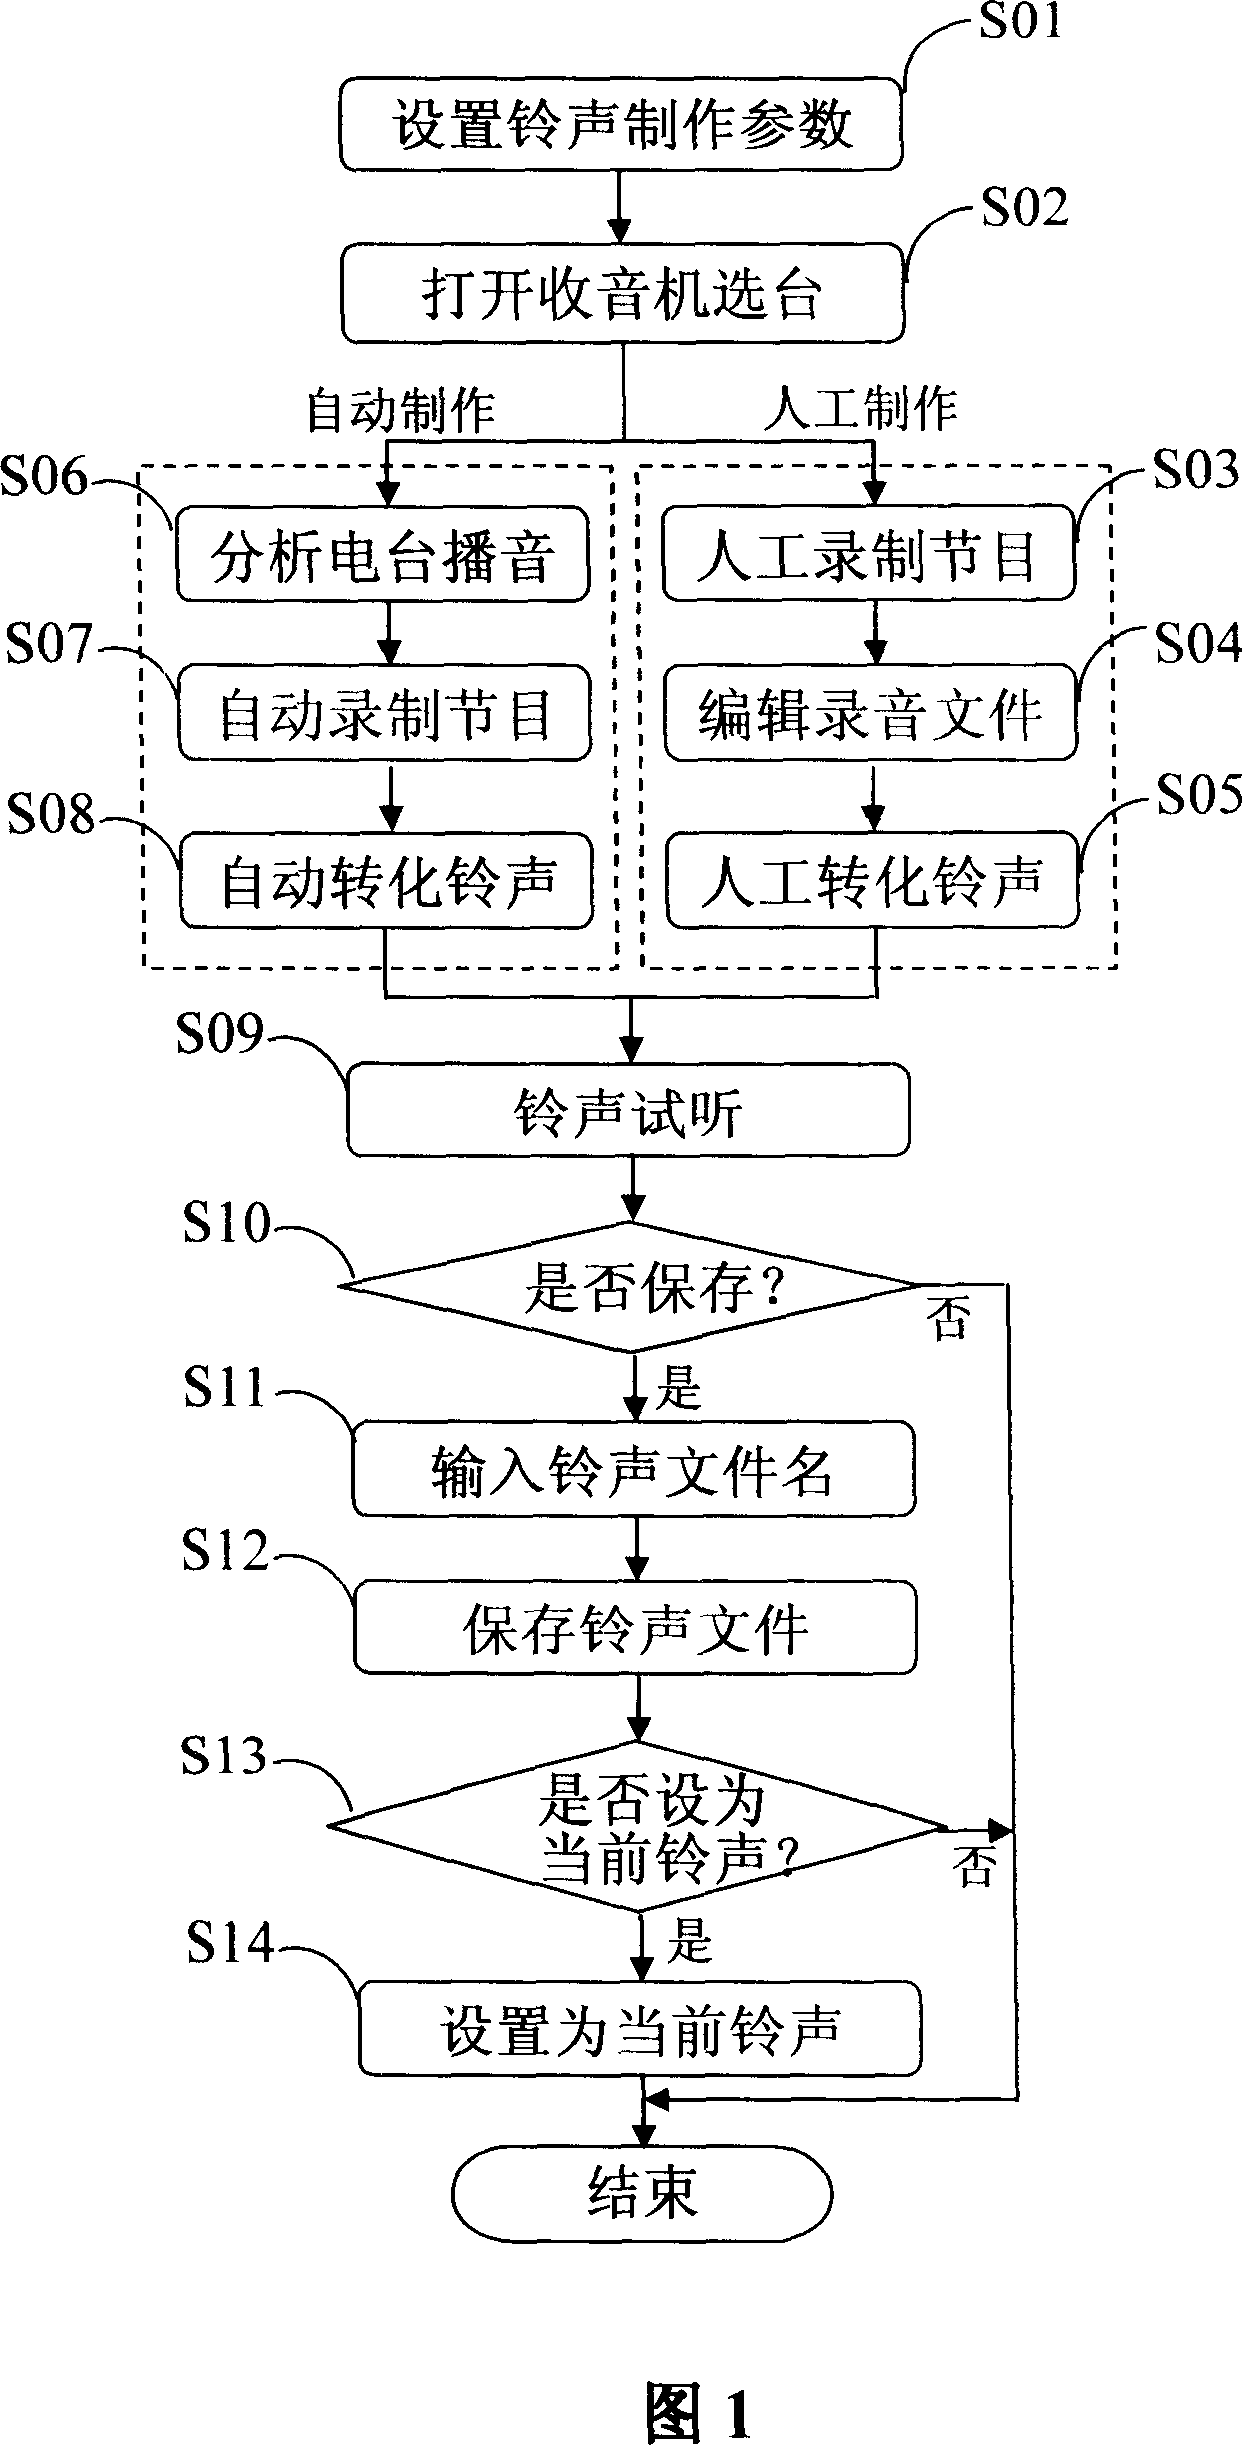 Ring making device of the mobile phone and its method